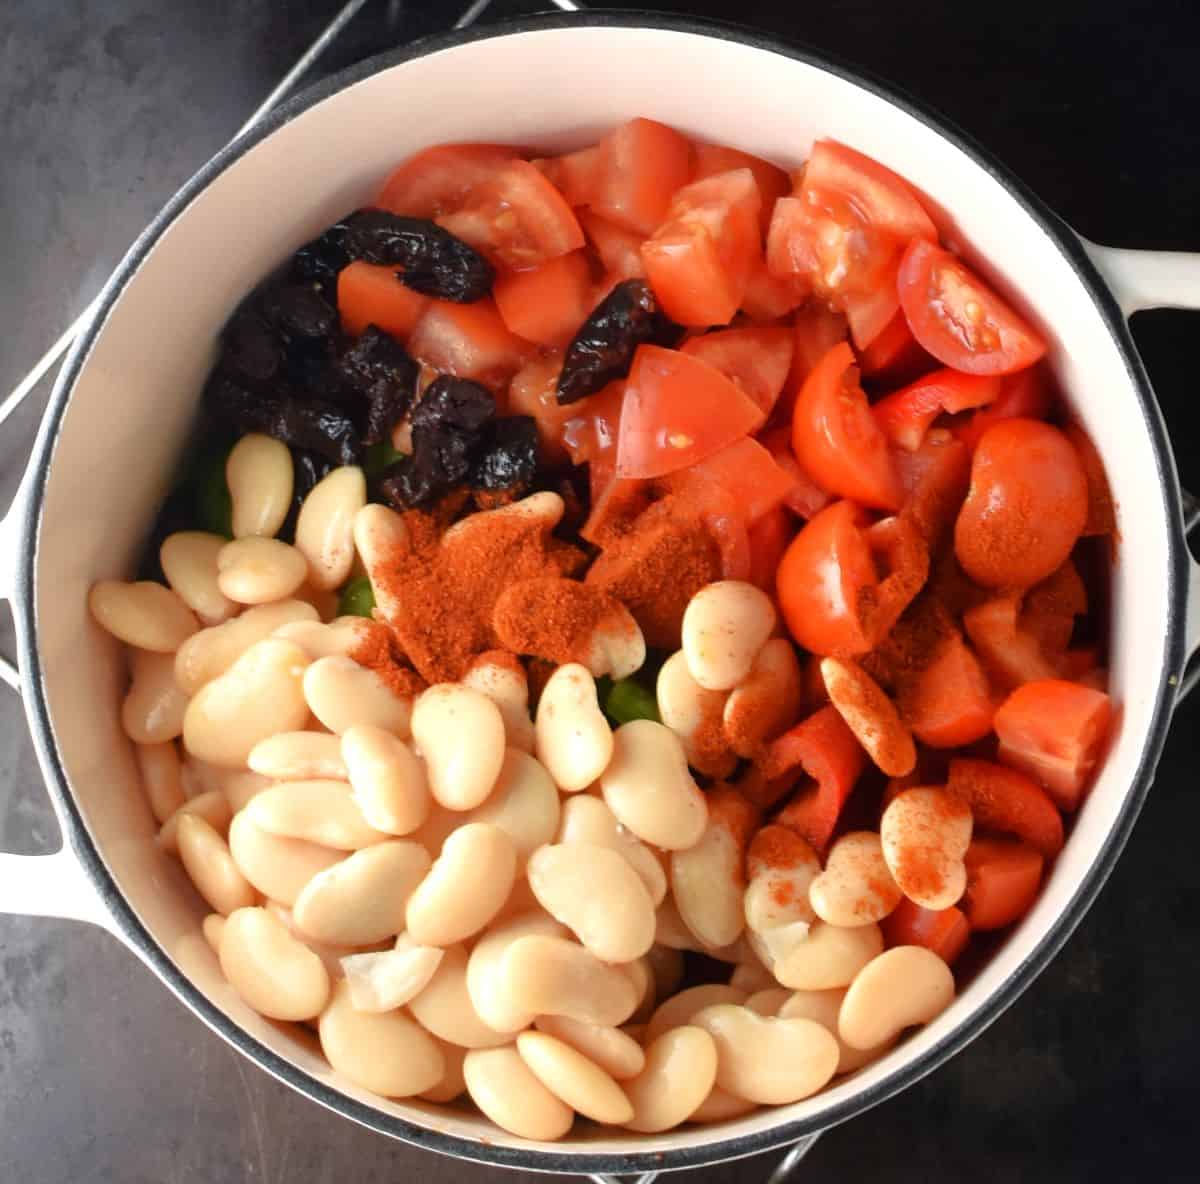 Chopped vegetables and white beans for goulash in pot.